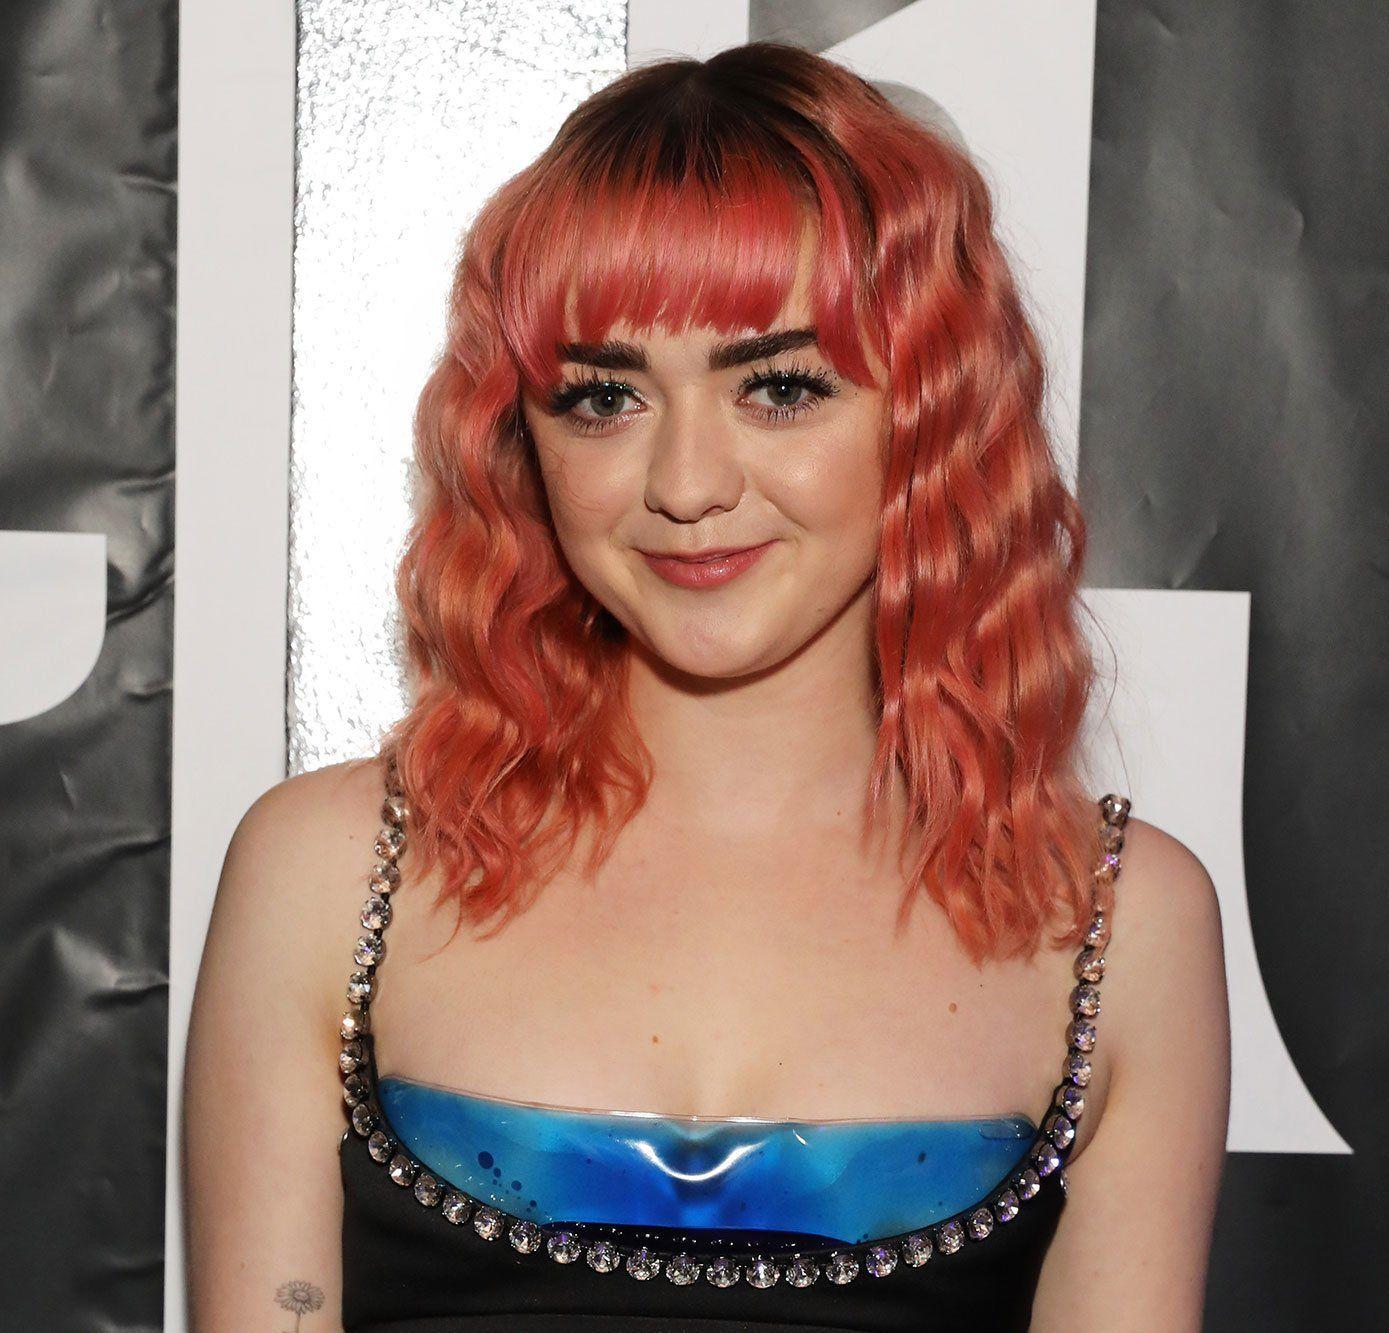 Maisie Williams Doesn't Have Pink Hair Anymore